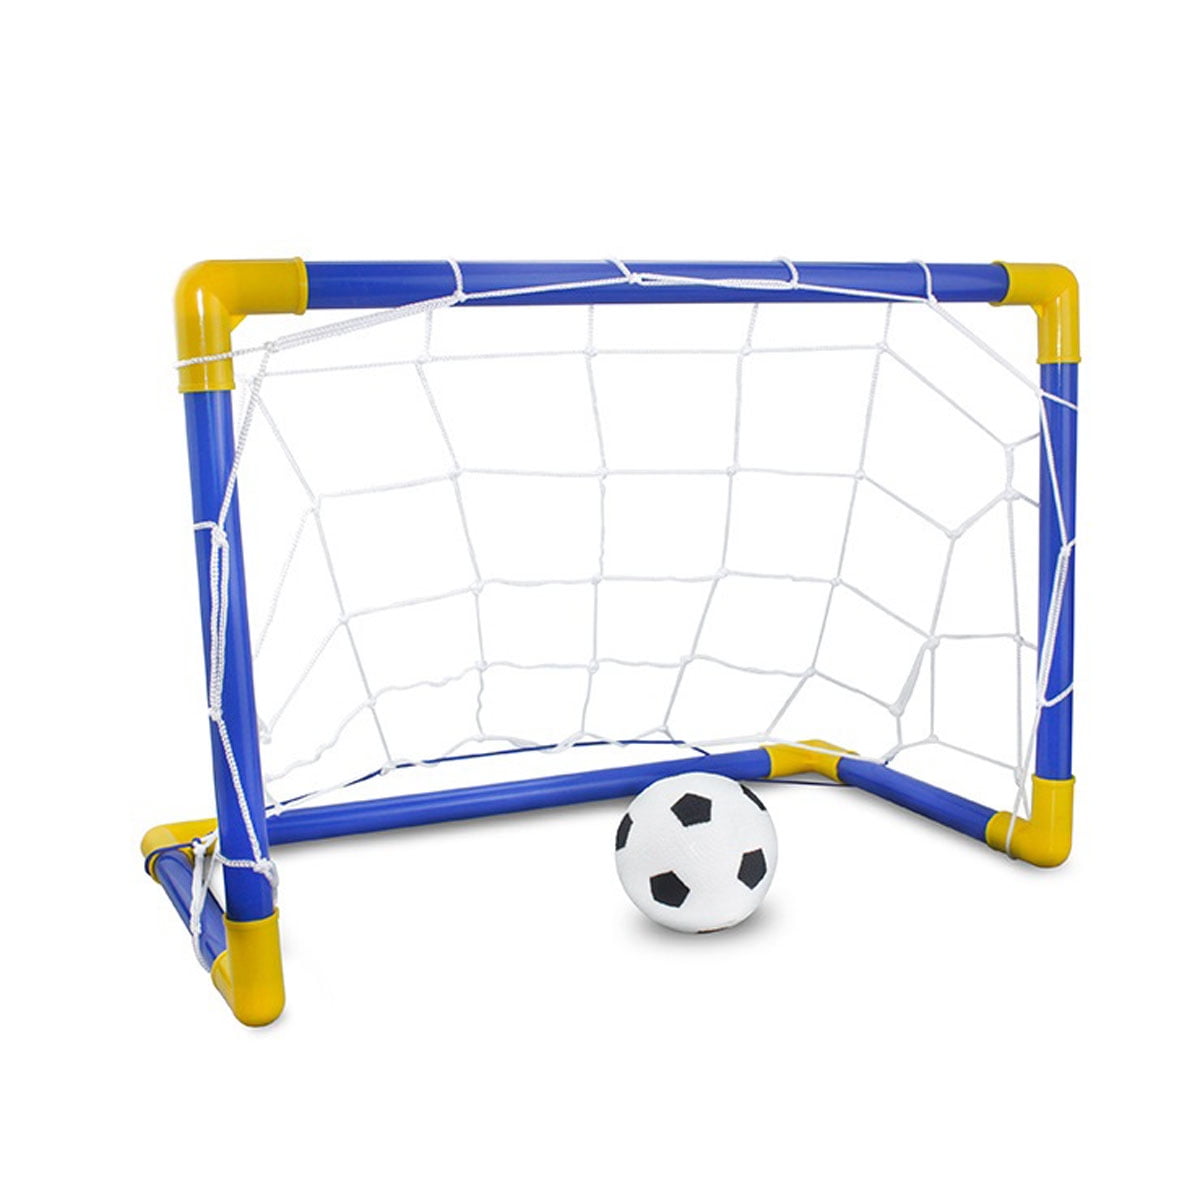 Details about   Kids Portable Folding Football Outdoor Soccer Goal Training Hot Net Carry T1Q2 